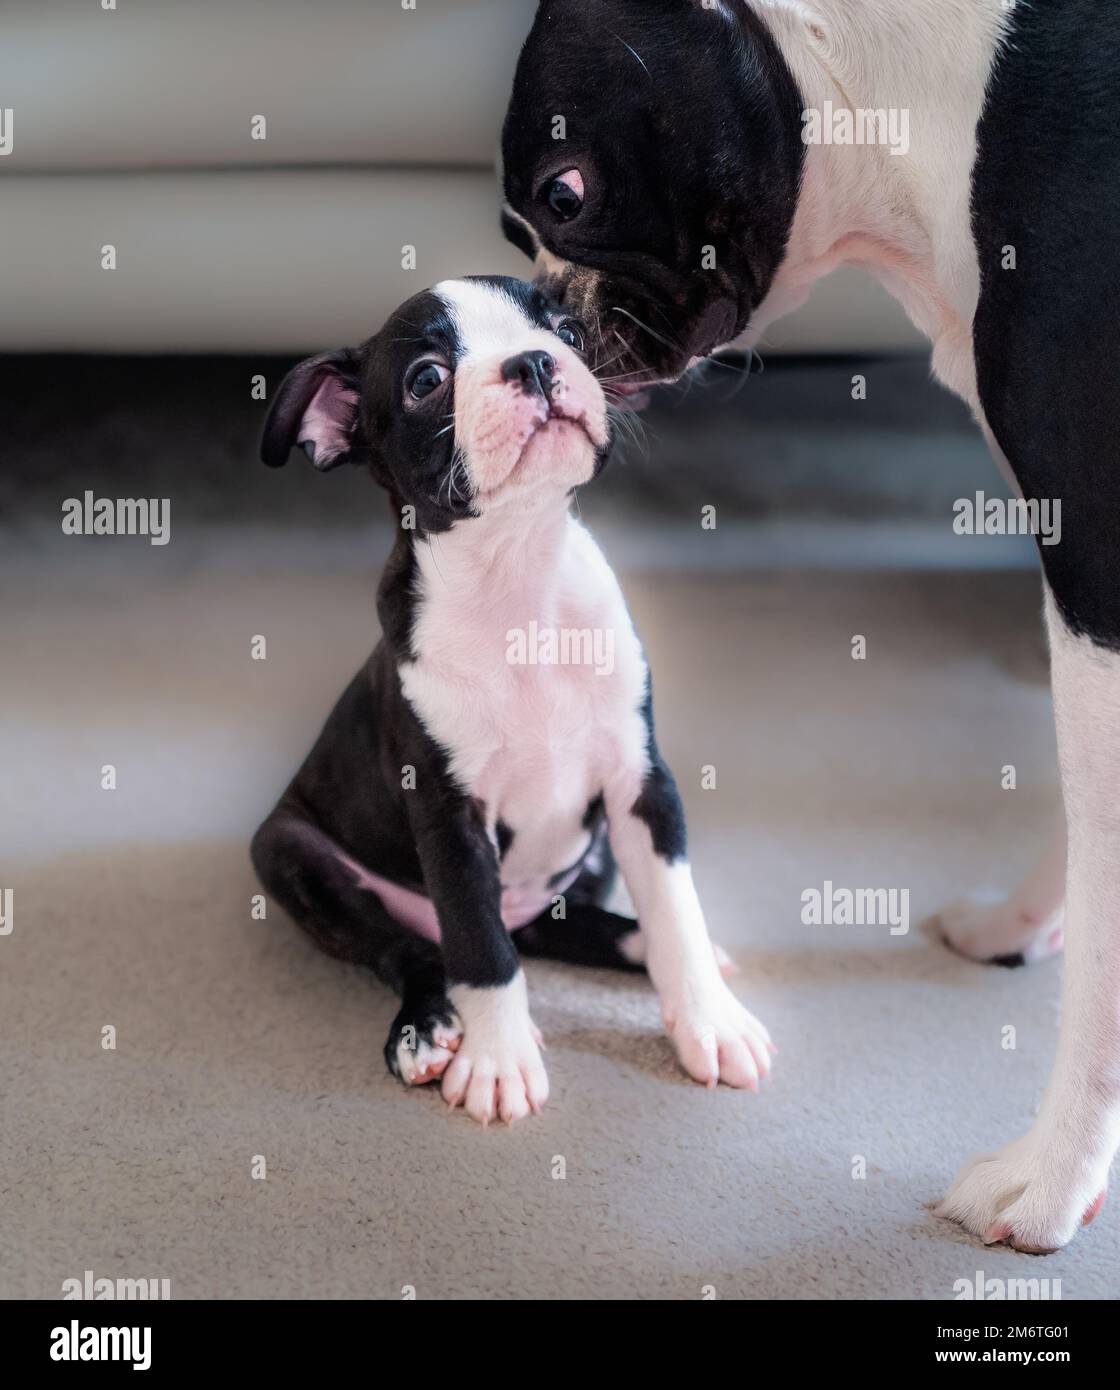 Boston Terrier puppy sitting with her head up is sniffed affectionately by a larger young dog. The puppy looks a little bit nervous. Stock Photo